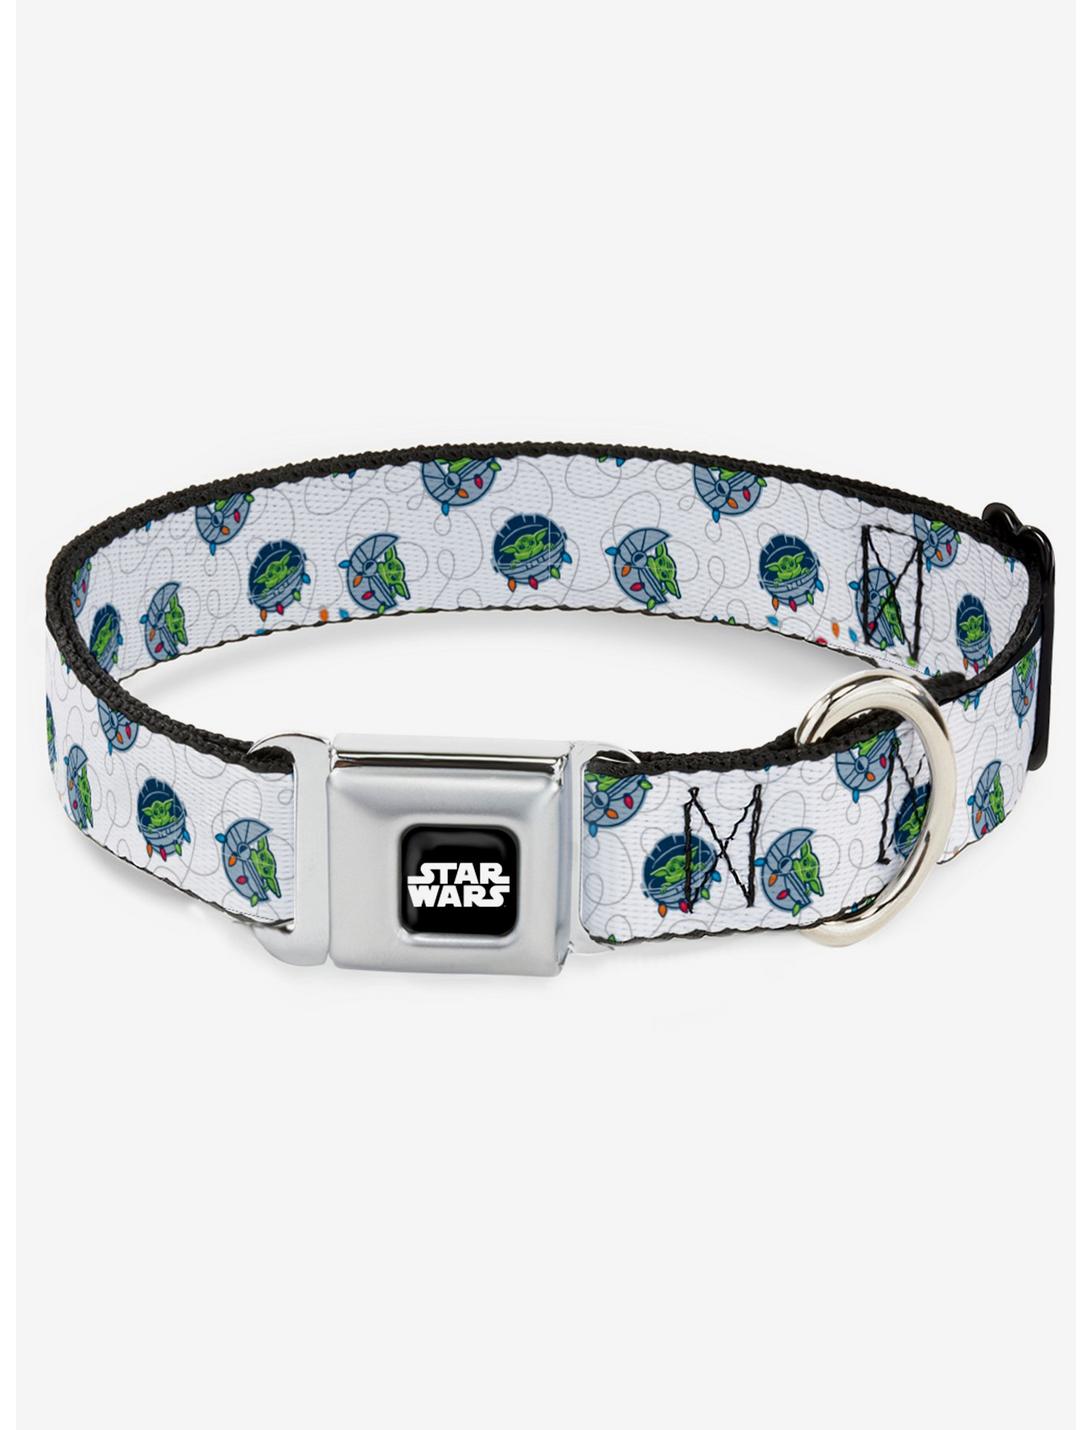 Star Wars The Mandalorian The Child Holiday Carriage Pod Seatbelt Dog Collar, MULTICOLOR, hi-res